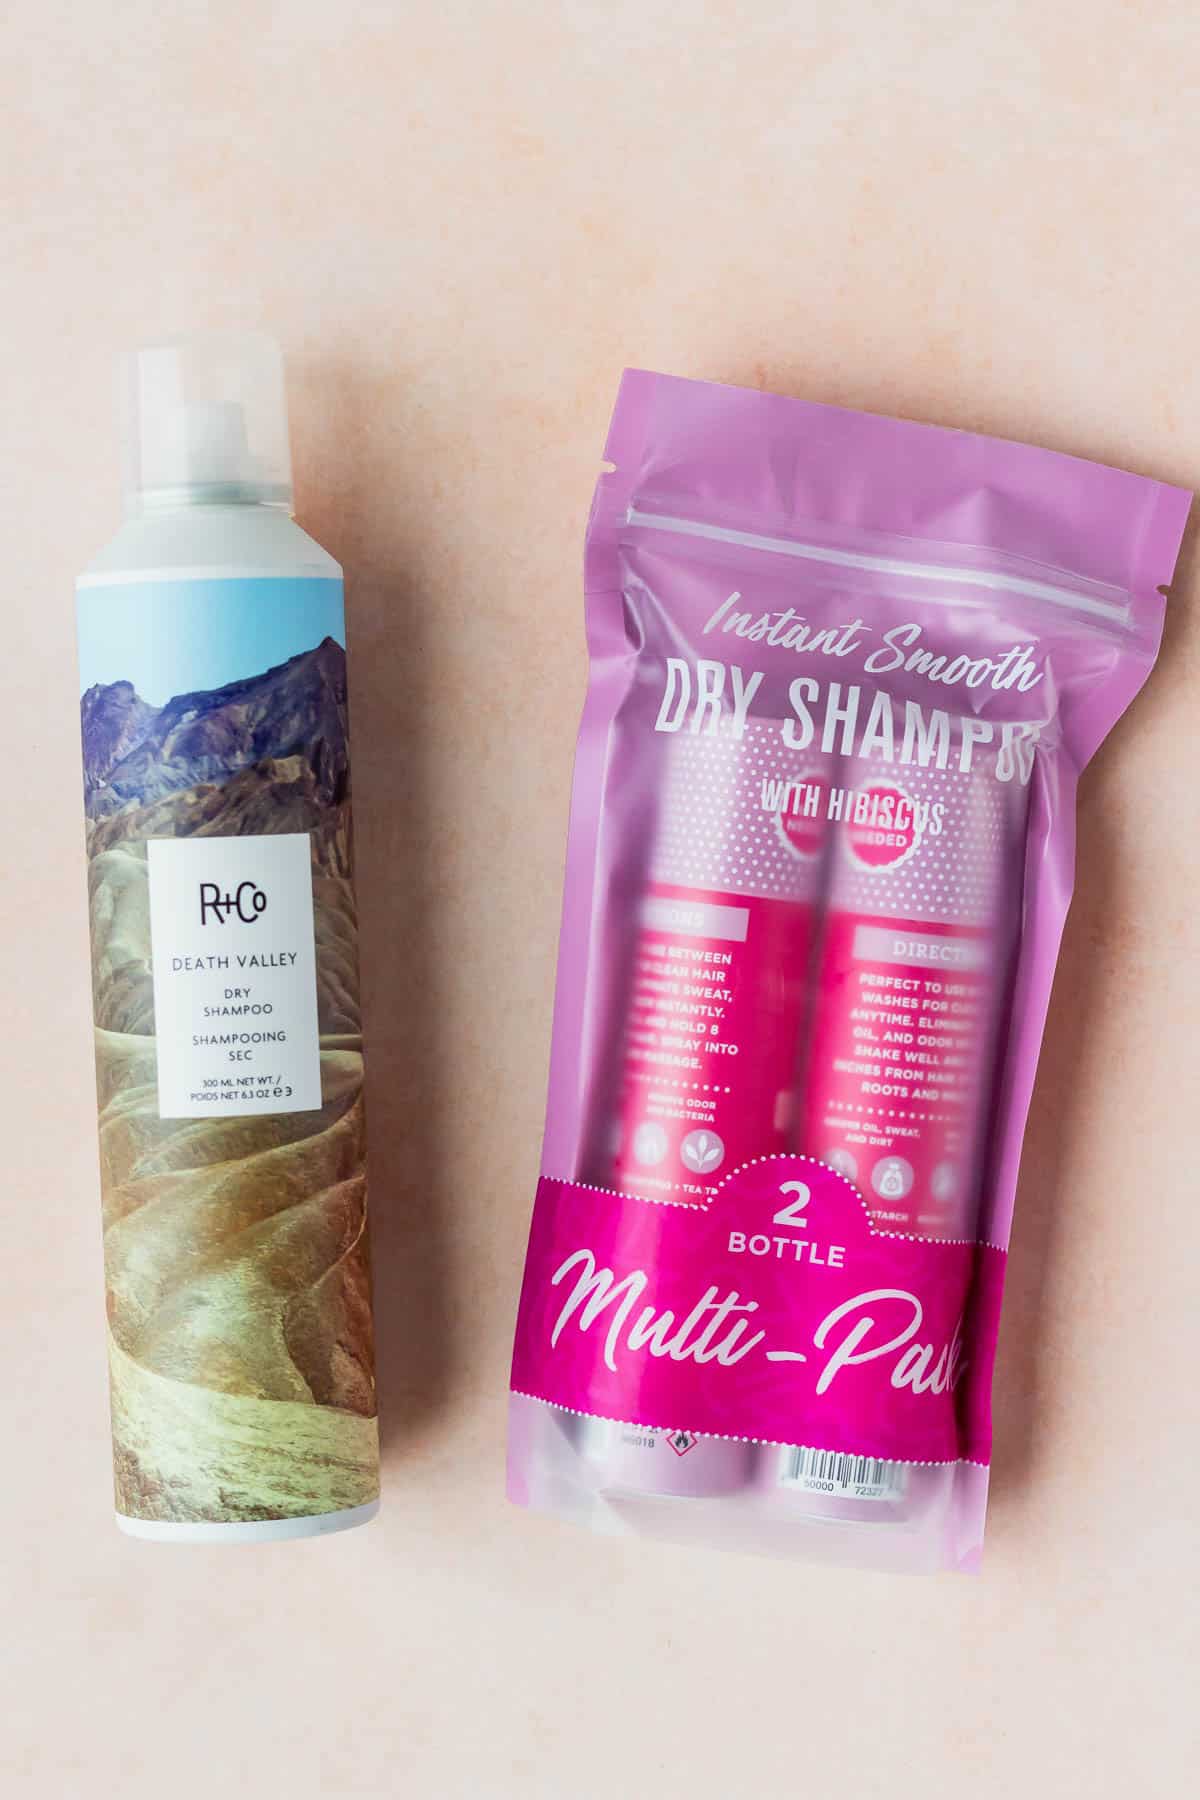 R + Co Dry Shampoo and a 2 pack of hibiscus dry shampoo on a peach backdrop 